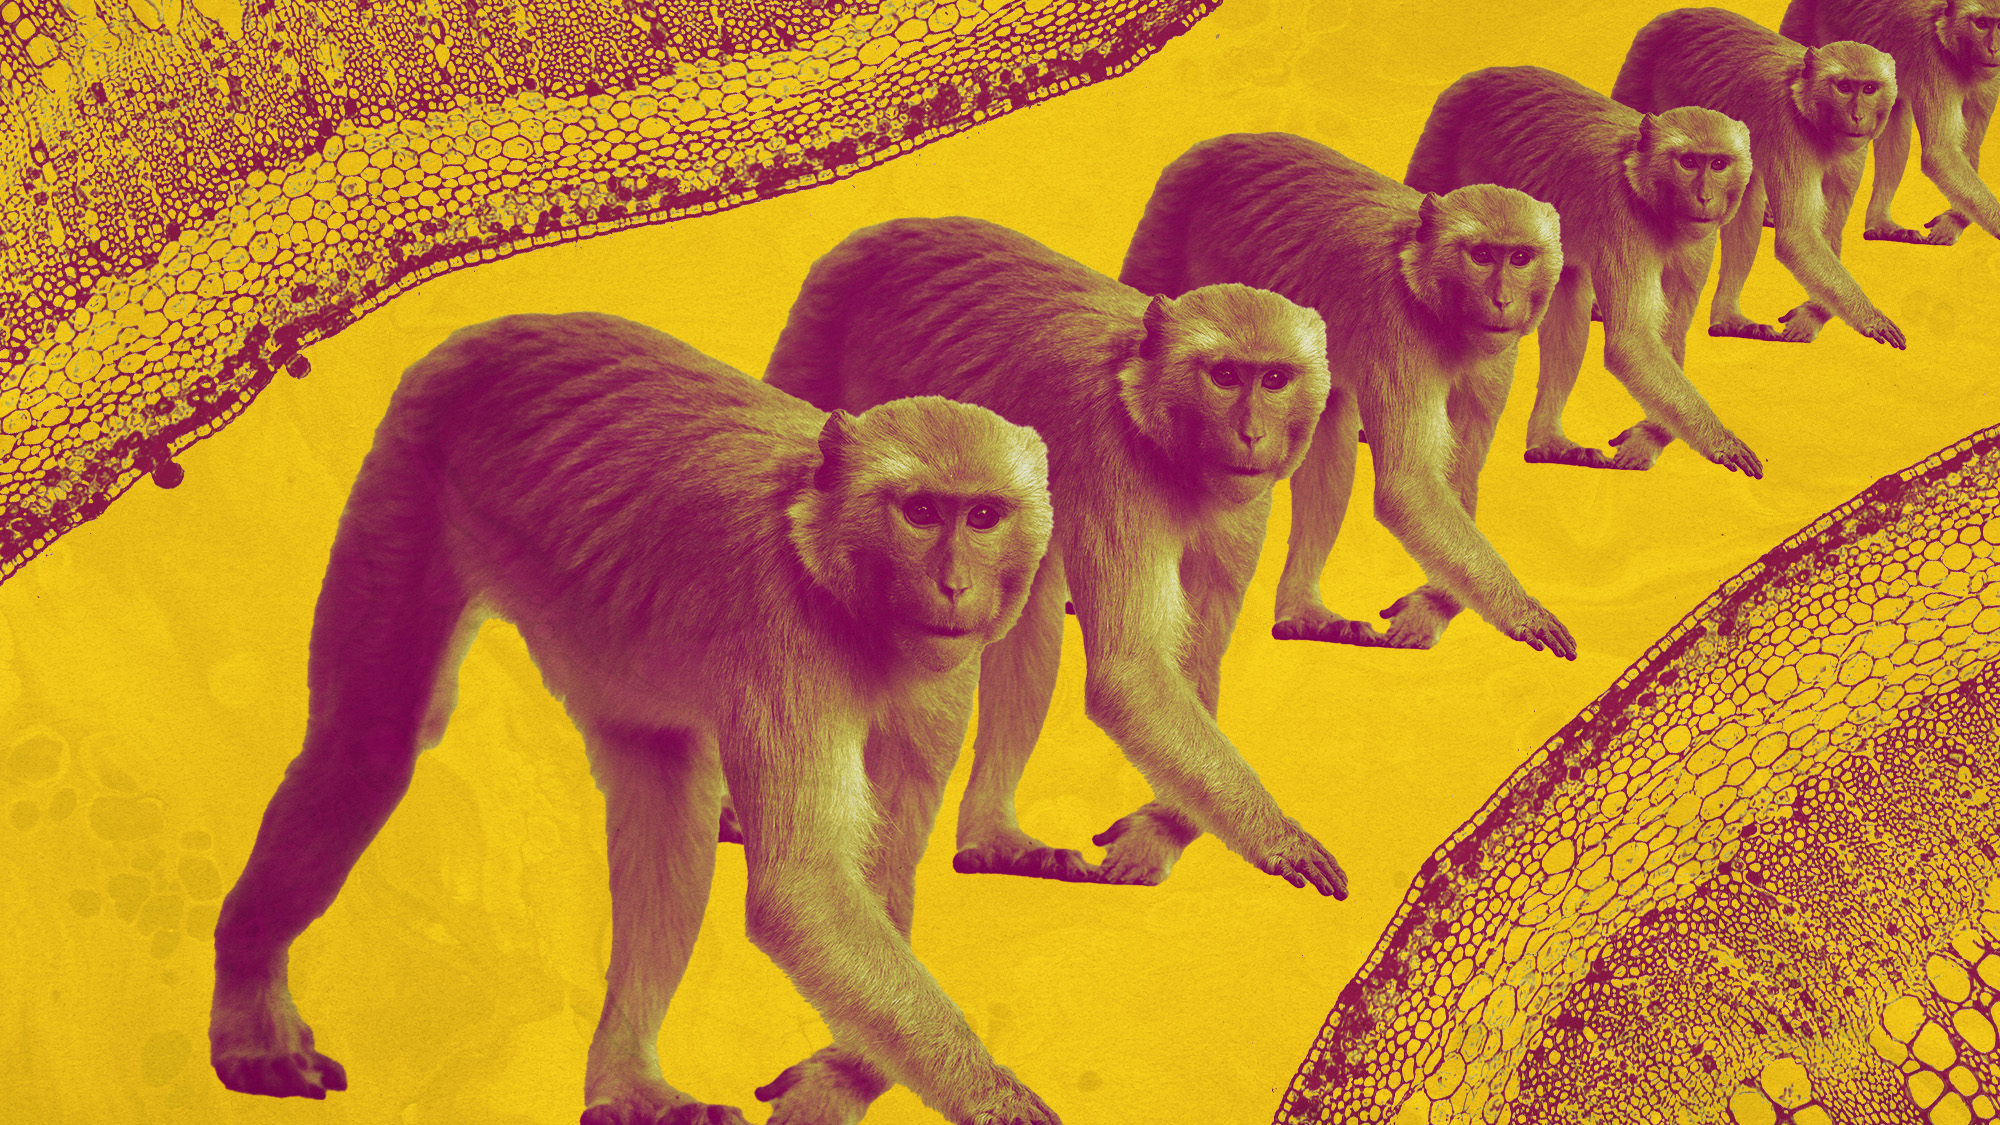  Science behind cloning monkeys is helping advance medical research 